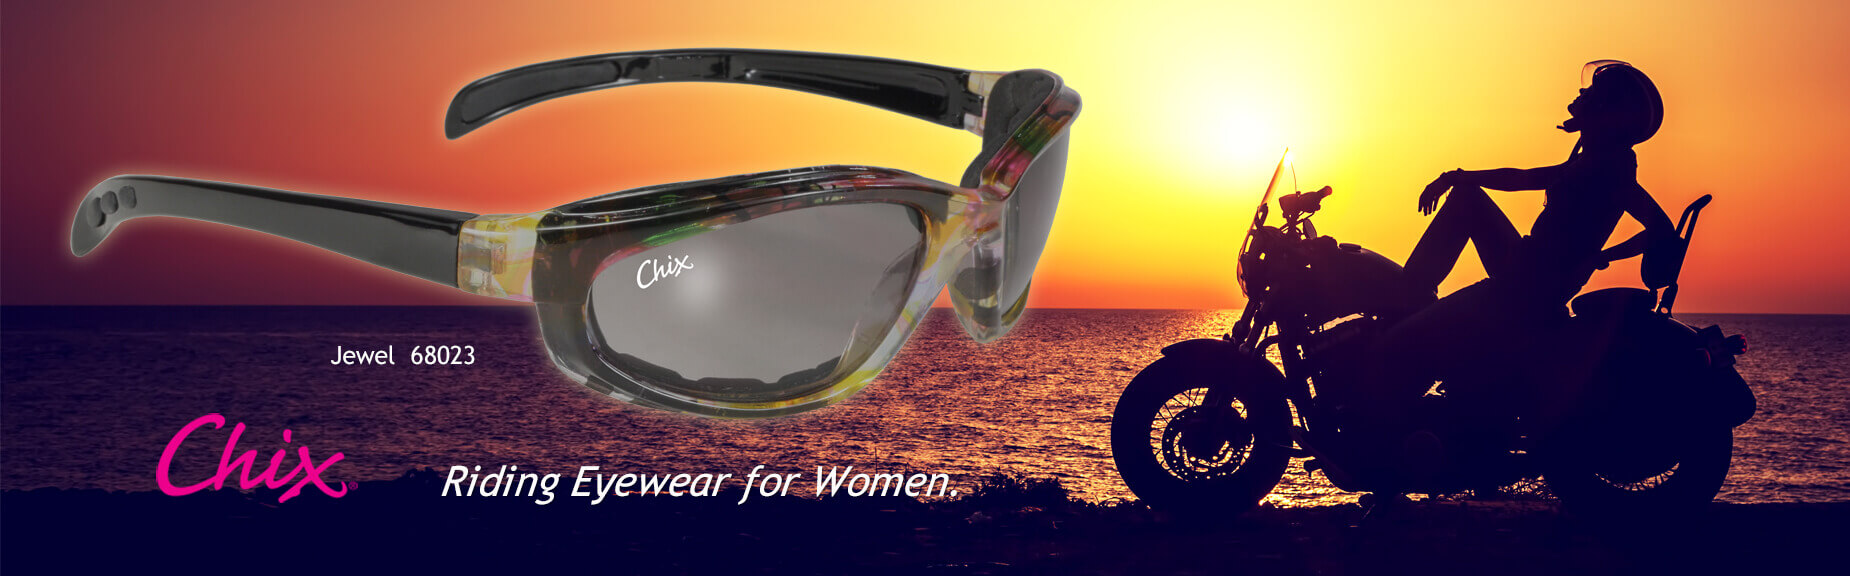 https://www.pacificcoastsunglasses.com/Shared/images/Product_Images/slider-chix-ad-2.jpg